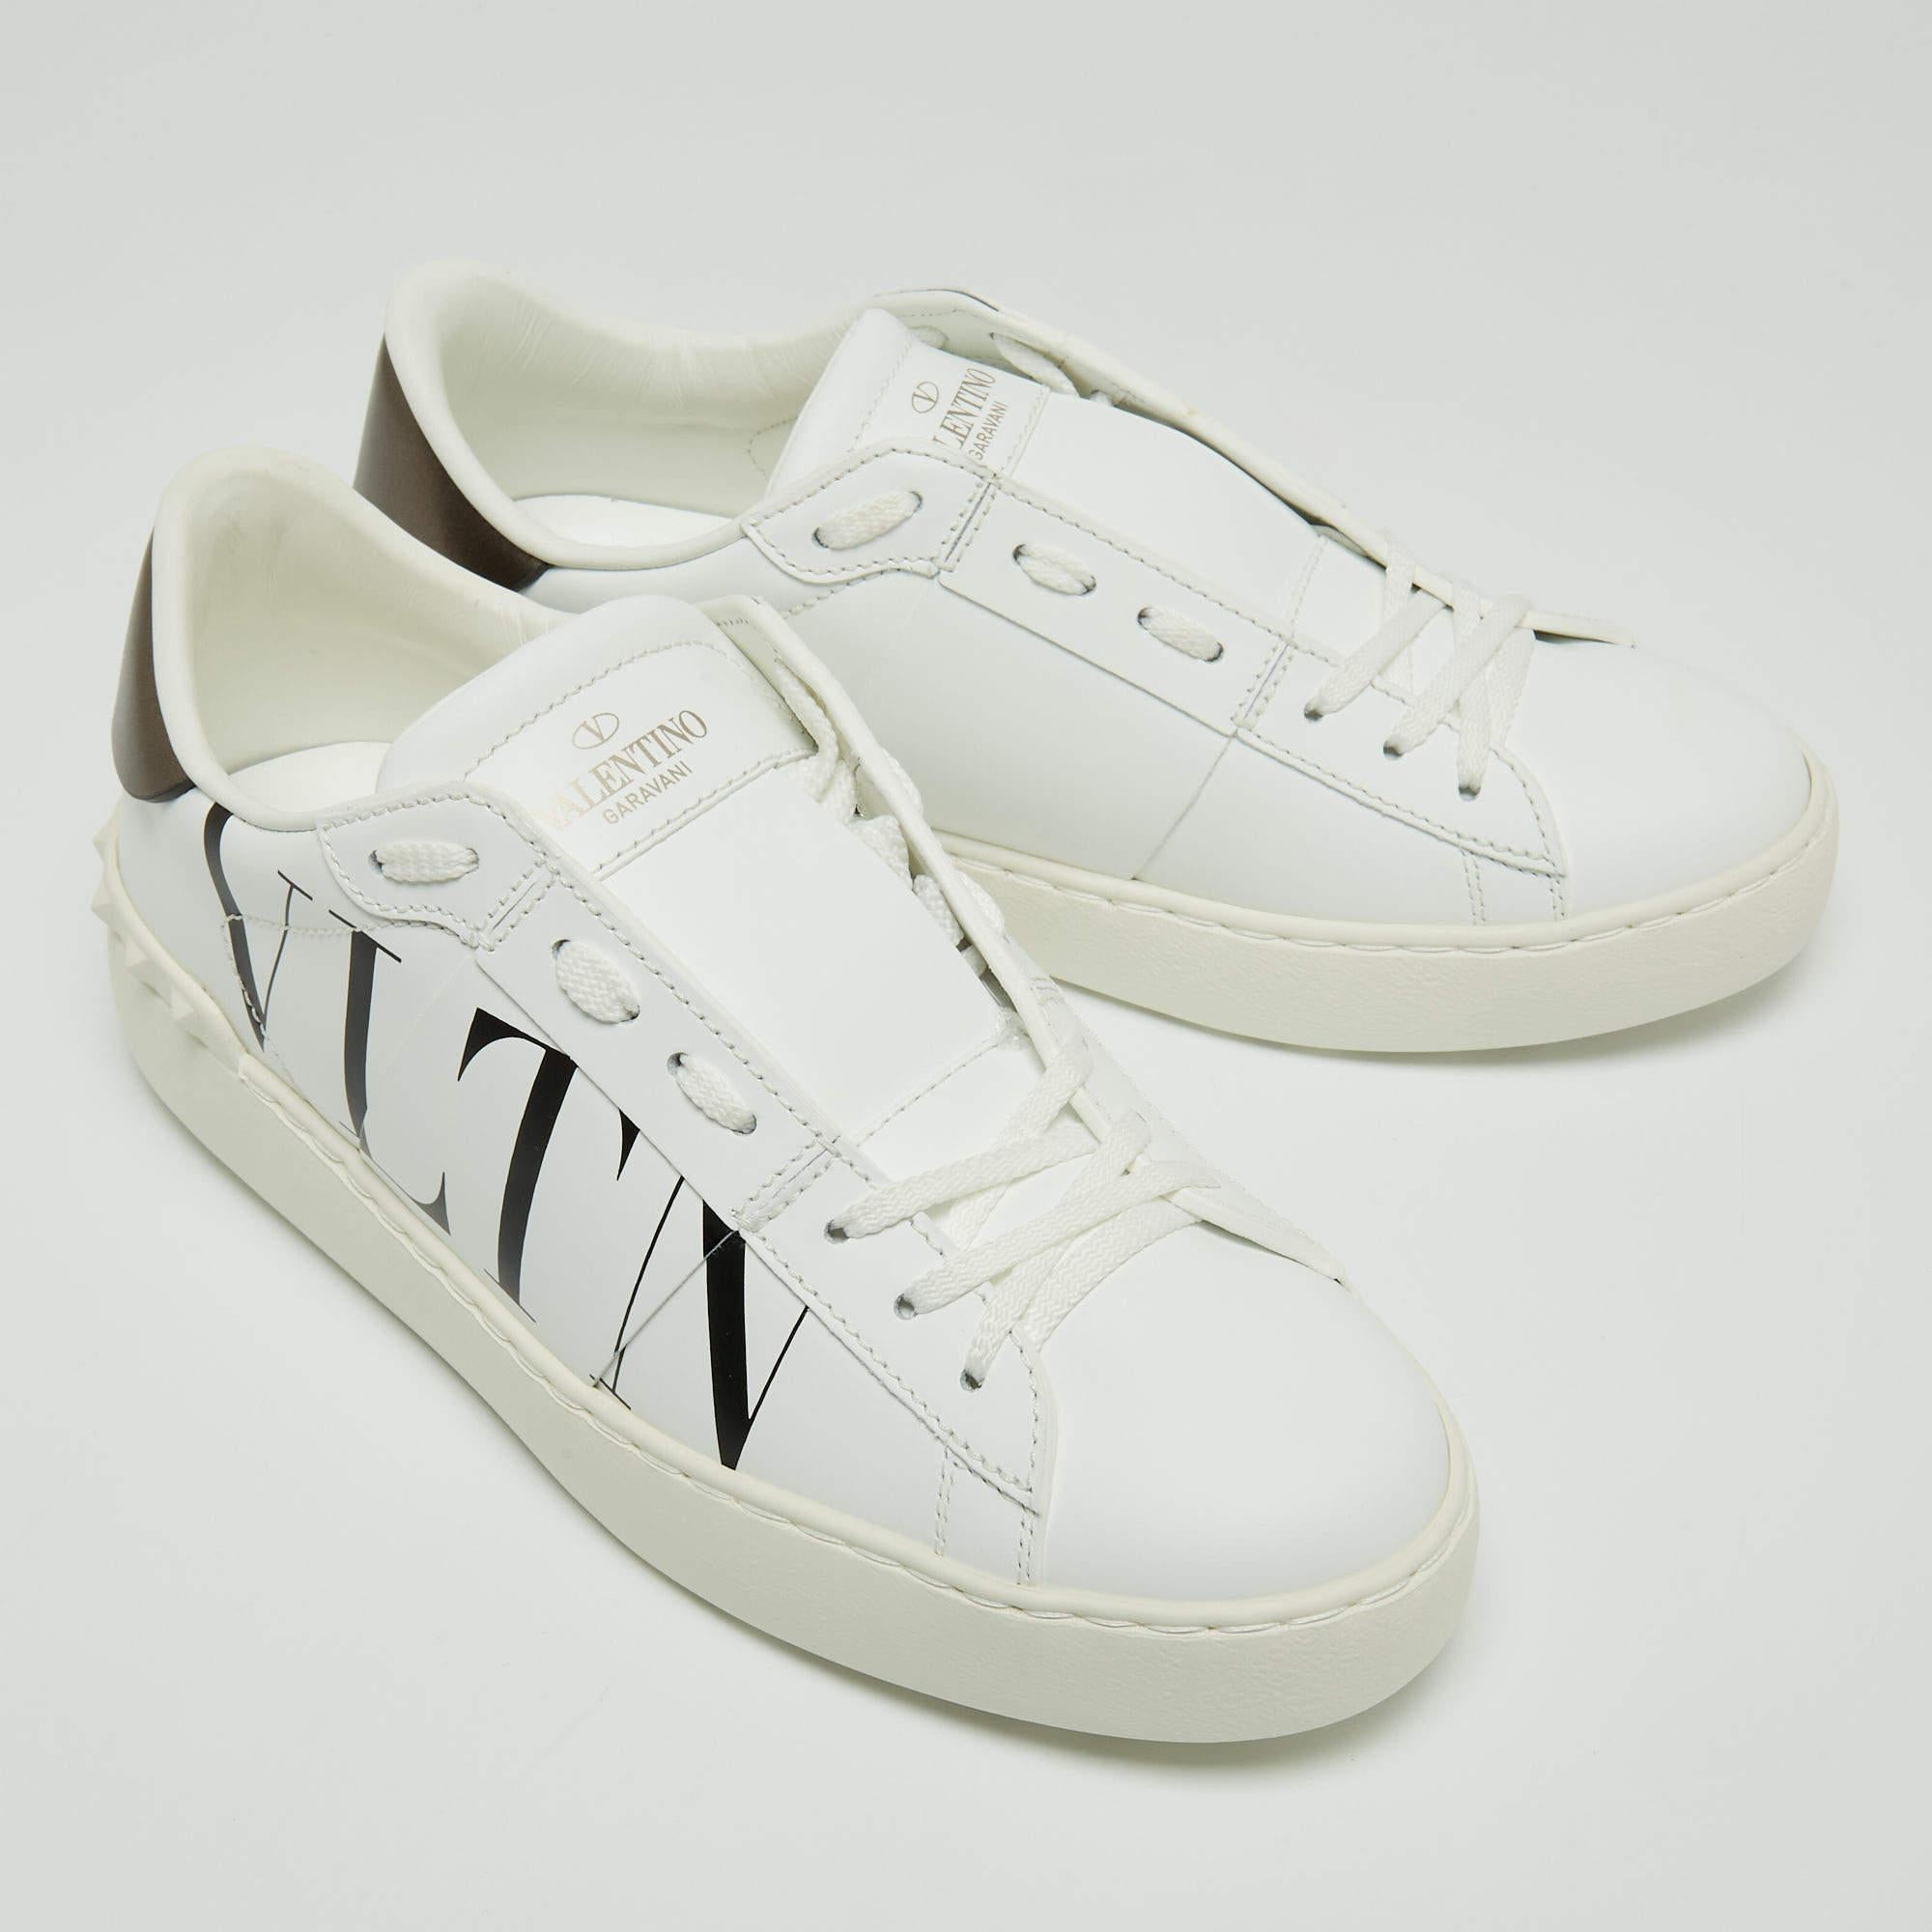 Gray Valentino White/Grey Leather VLTN Rockstud Sneakers Size 37